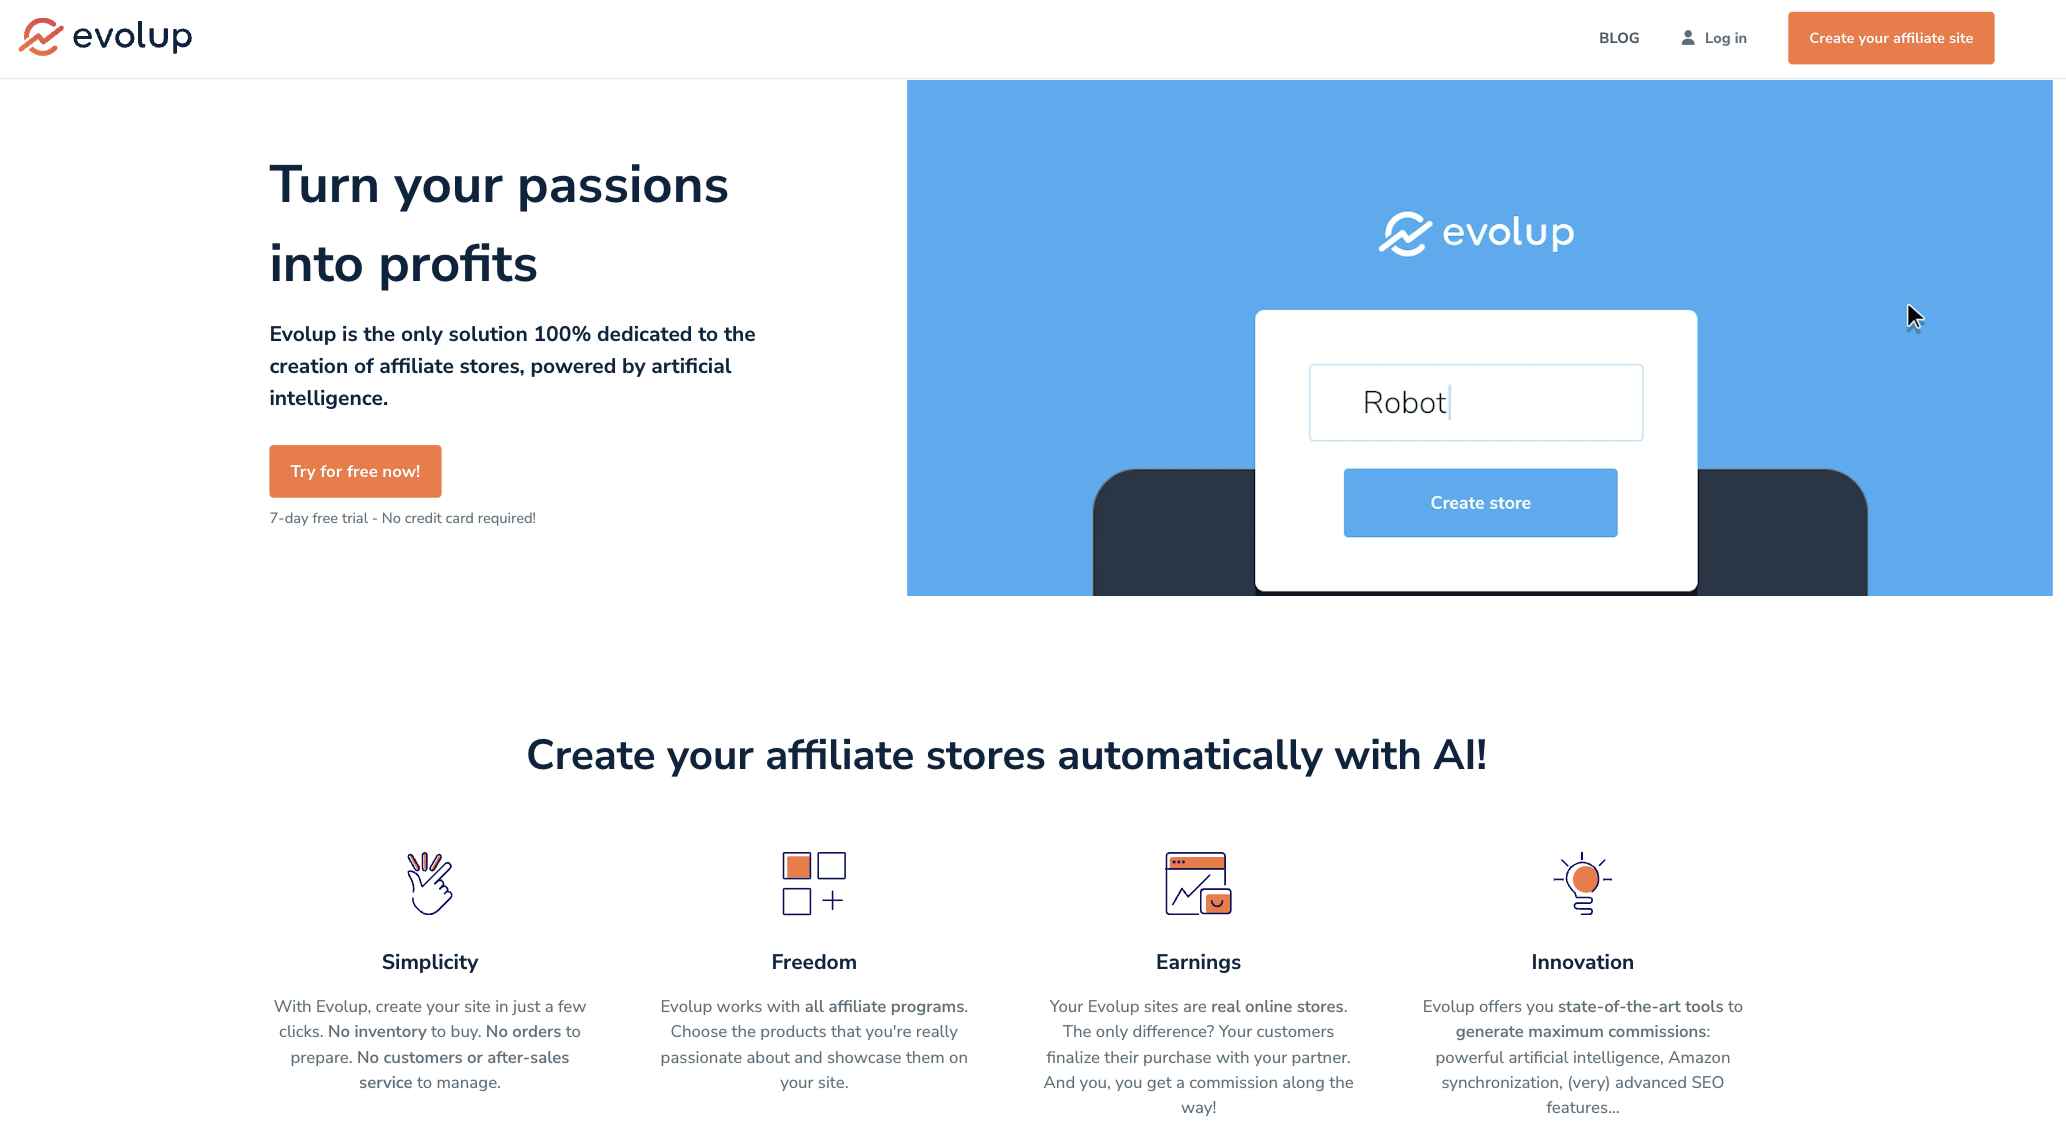 evolup best AI tool for amazon sellers